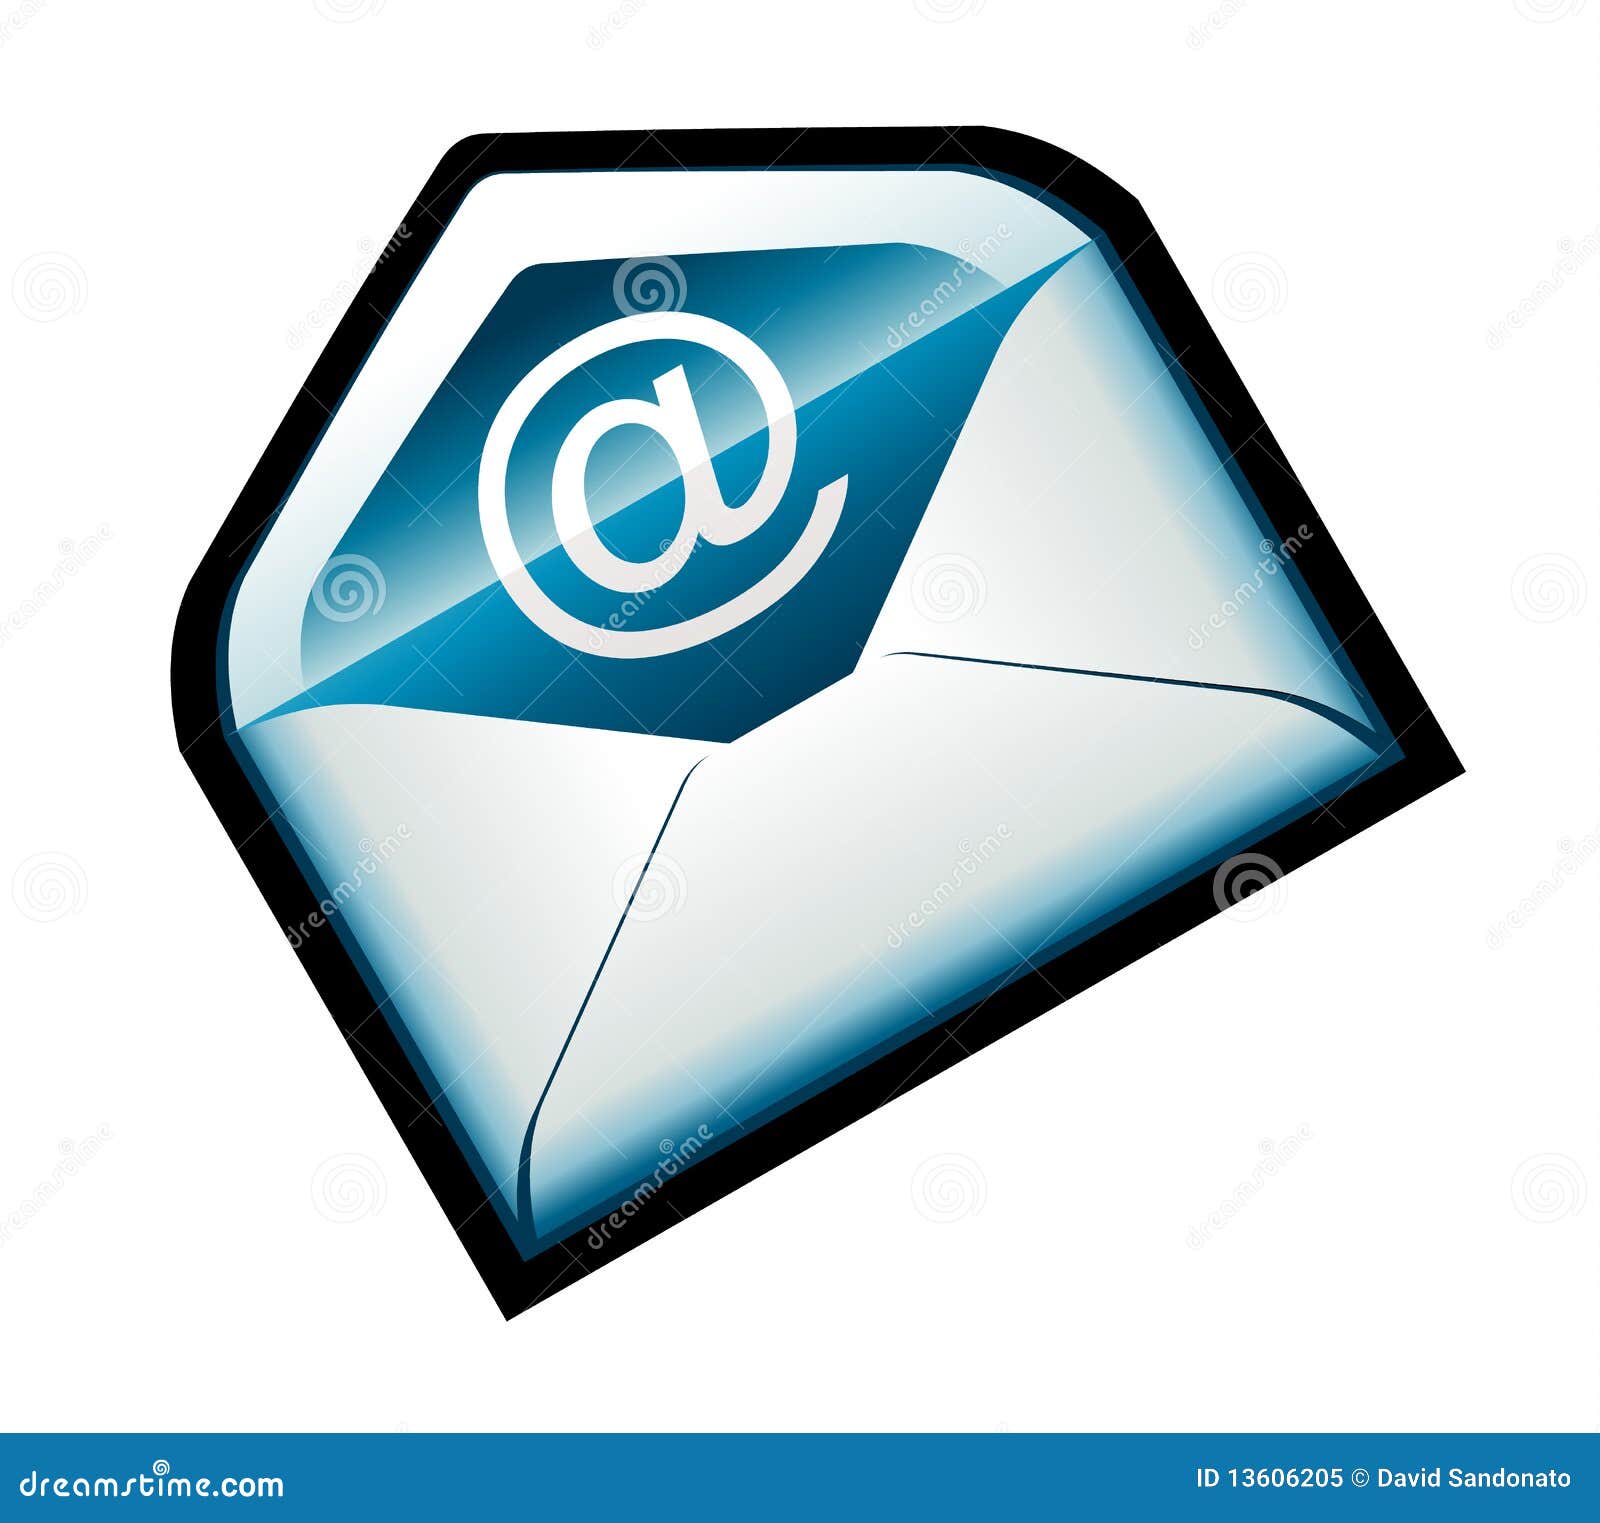 email clipart blue - photo #37